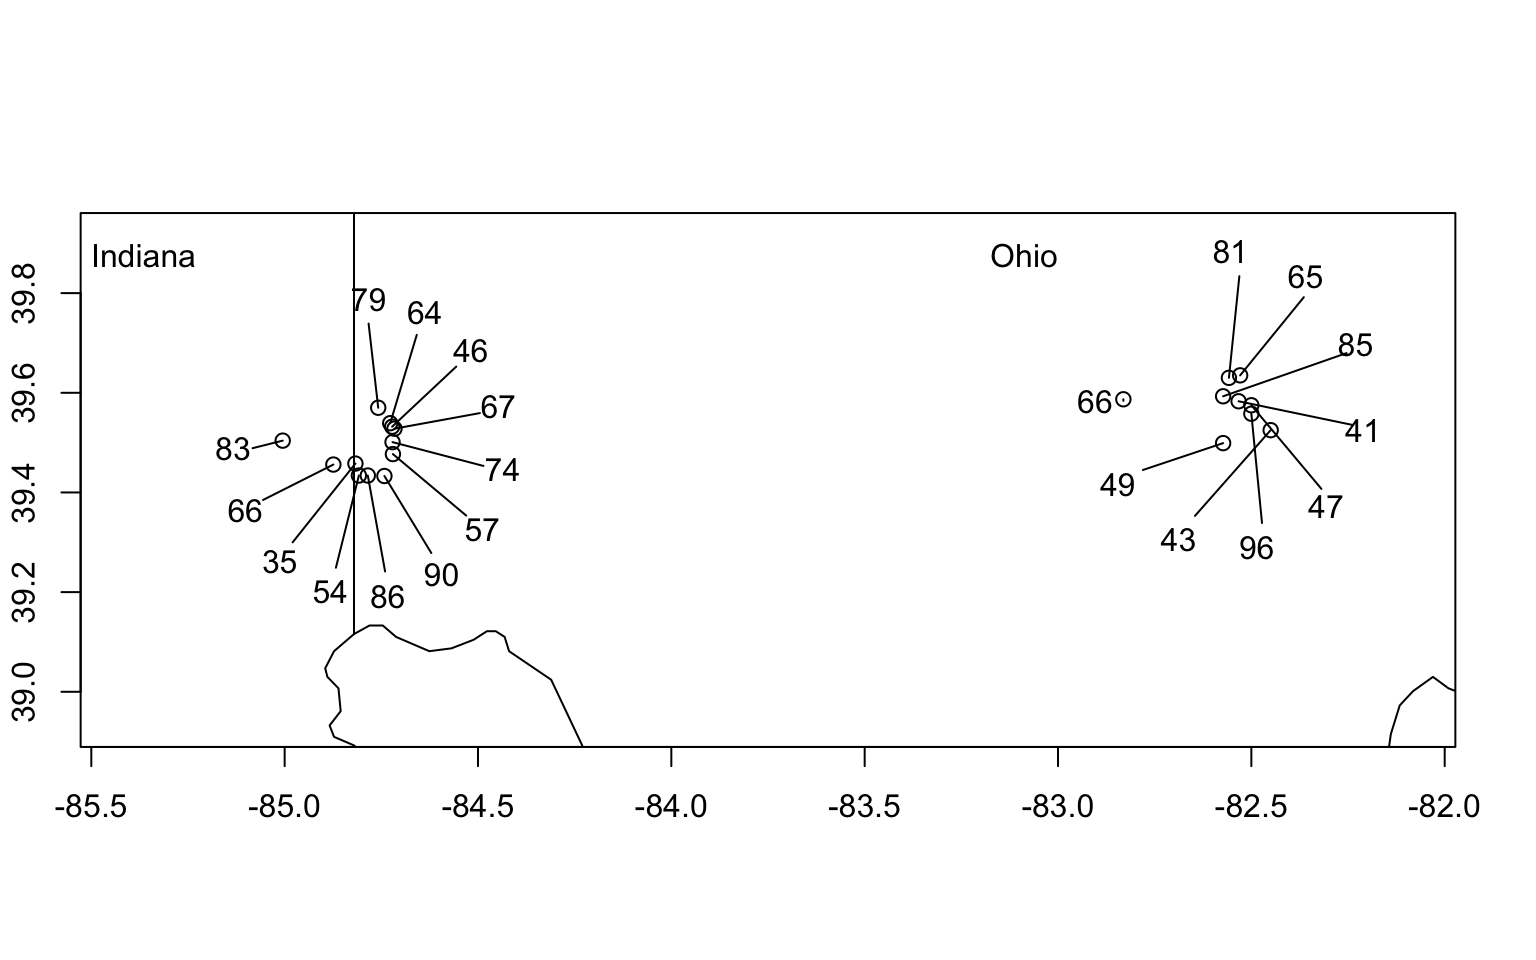 Hierarchical sampling of moth species richness in forest patches in Indiana and Ohio, USA. $\alpha$-diversity is the diversity of a single site (richness indicated by numbers). $\gamma$-diversity is the total number of species found in any of the samples (here $\gamma=230$ spp.). Additive $\beta$-diversity is the difference, $\gamma - \bar{\alpha}$, or the average number of species not observed in a single sample. Diversity partitioning can be done at two levels, sites within ecoregions and ecoregions within the geographic region (see example in text for details).